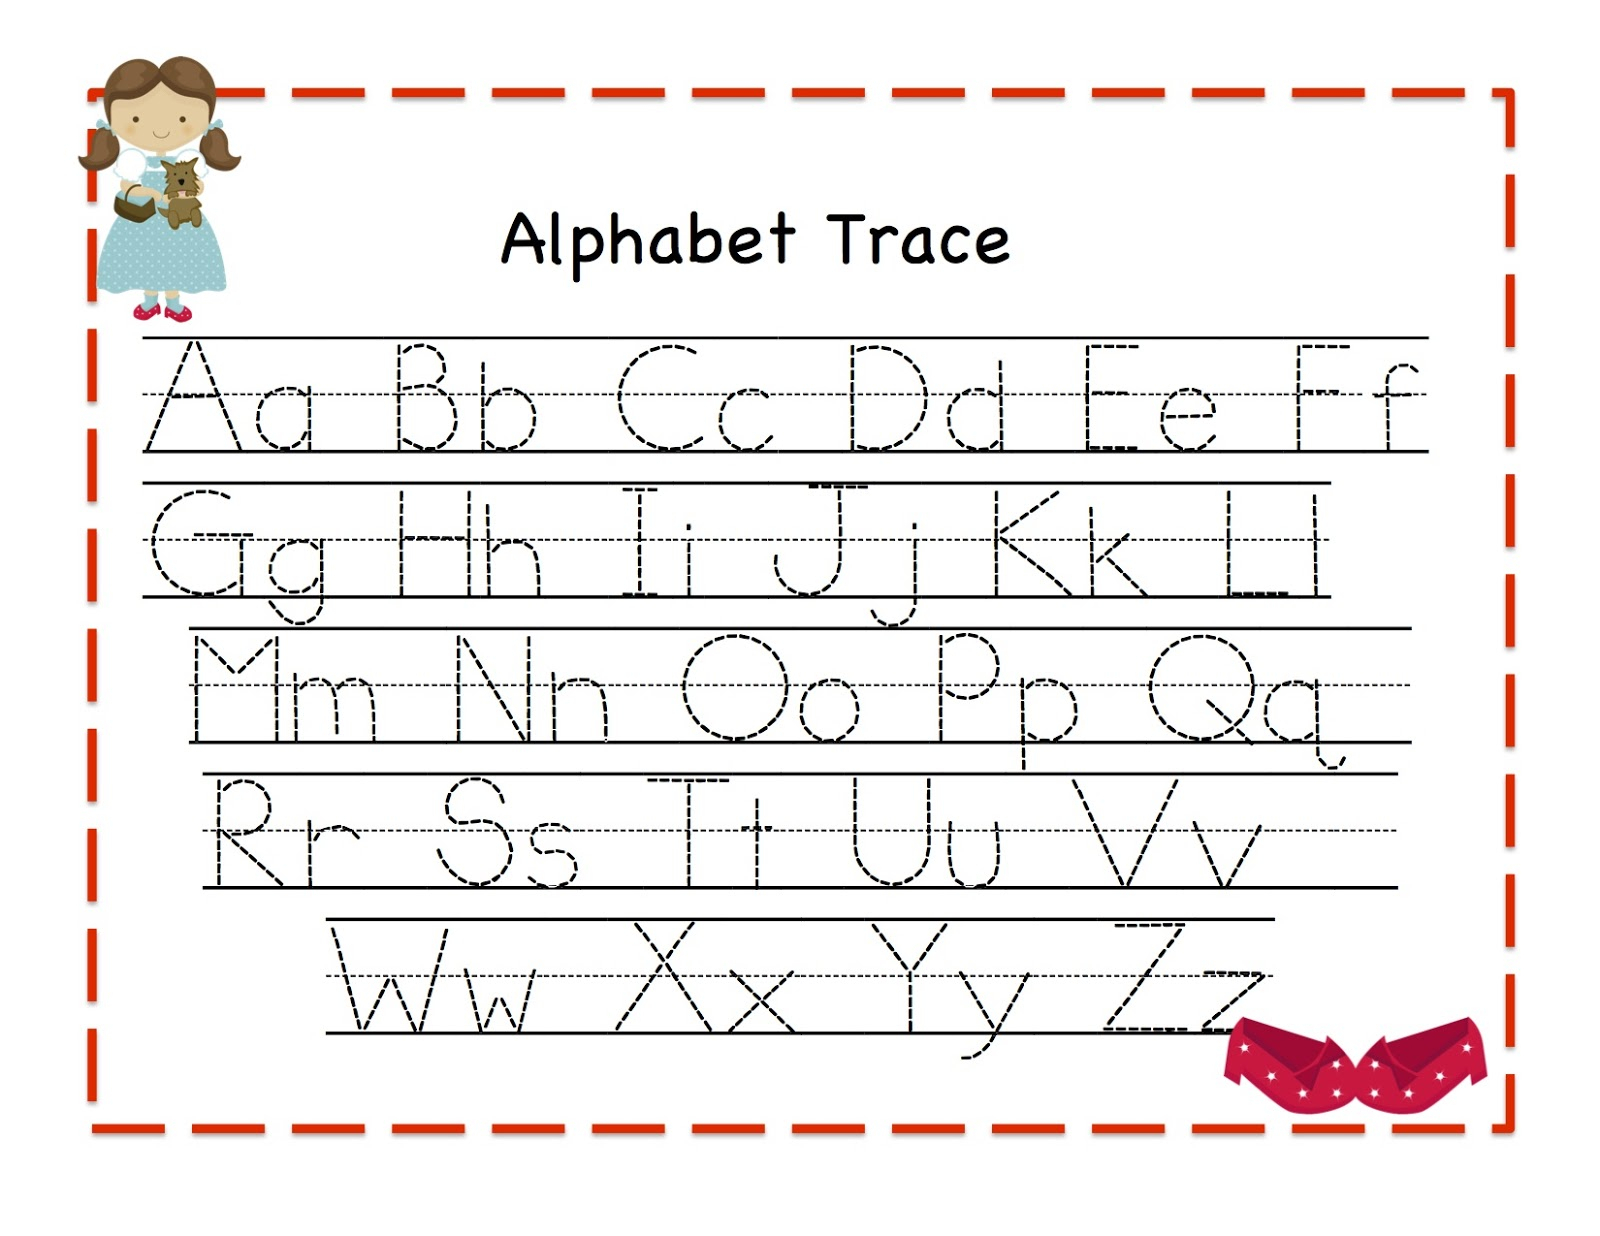 Free Alphabet Tracing Templates ] - Tracing Letters Template inside Free Tracing Letters Worksheet A-Z